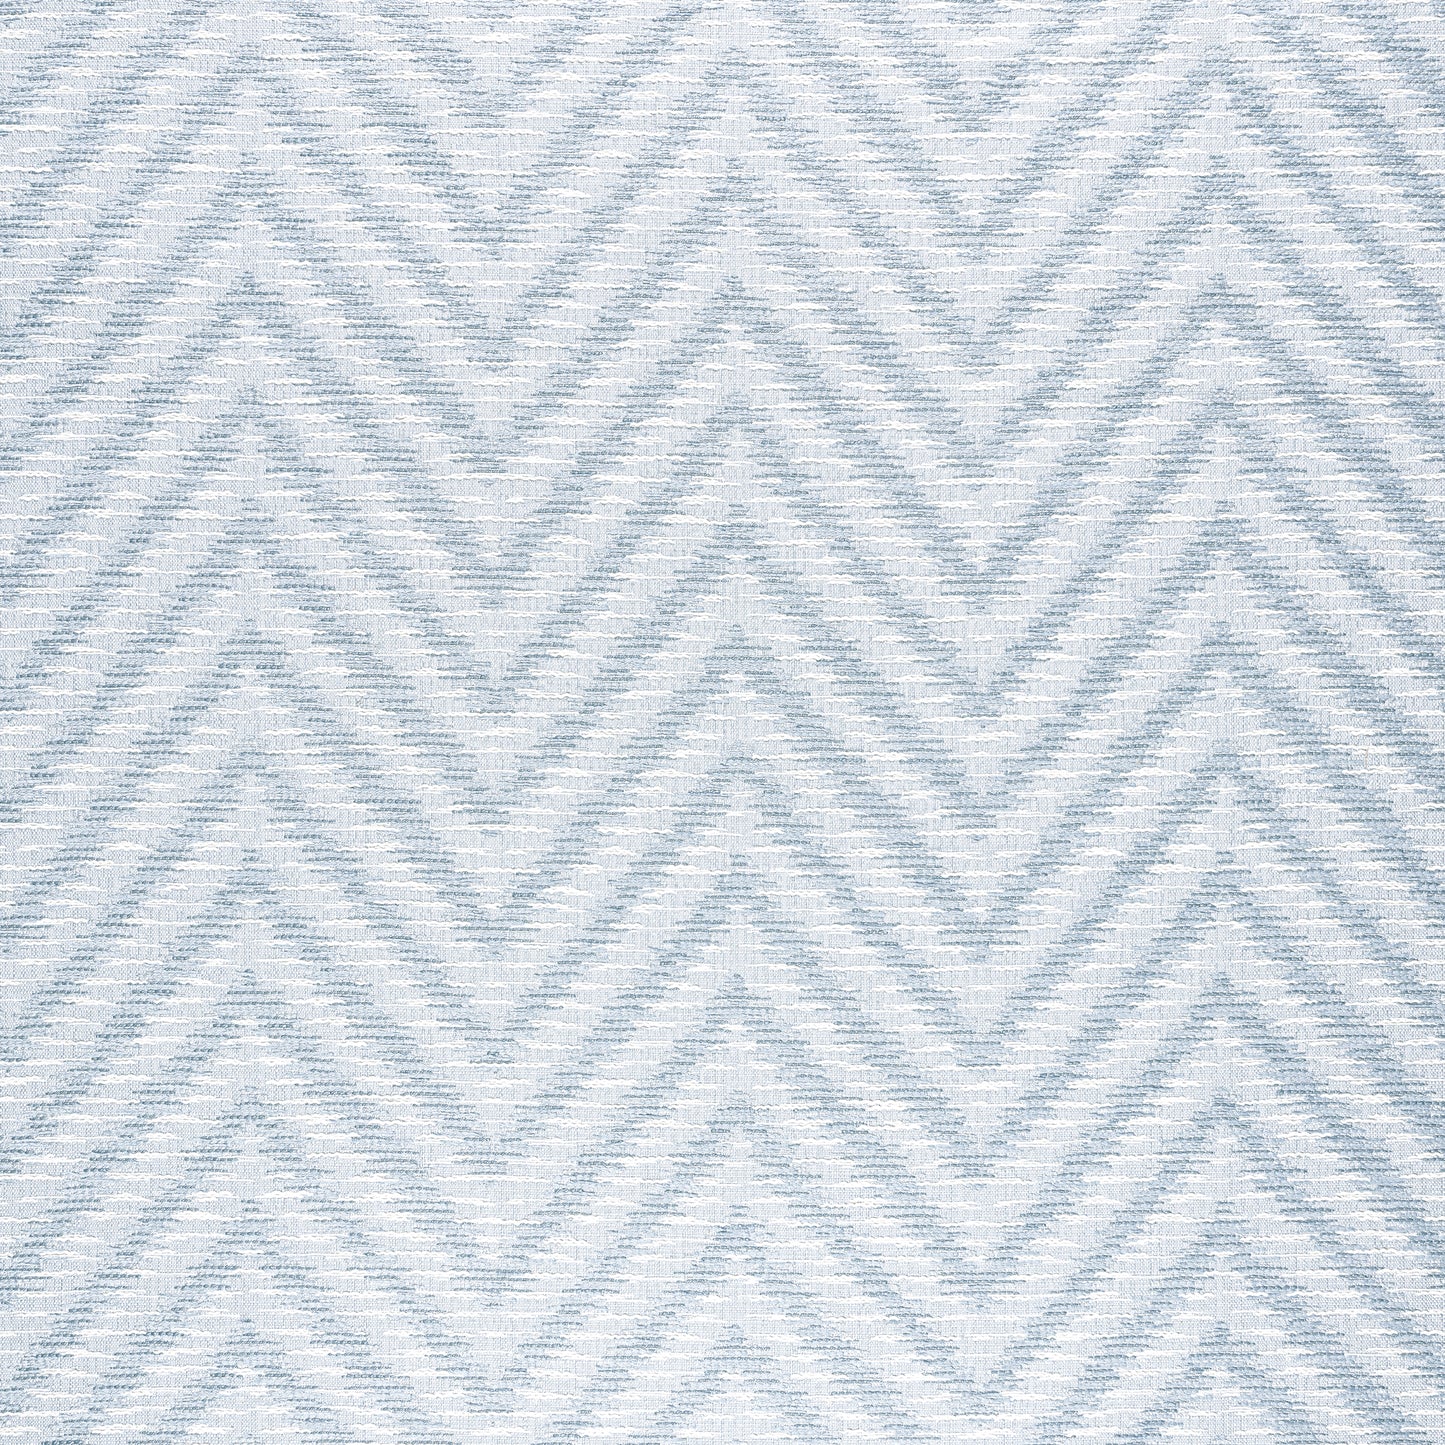 Purchase Thibaut Fabric Item# W8818 pattern name Aliso color Powder